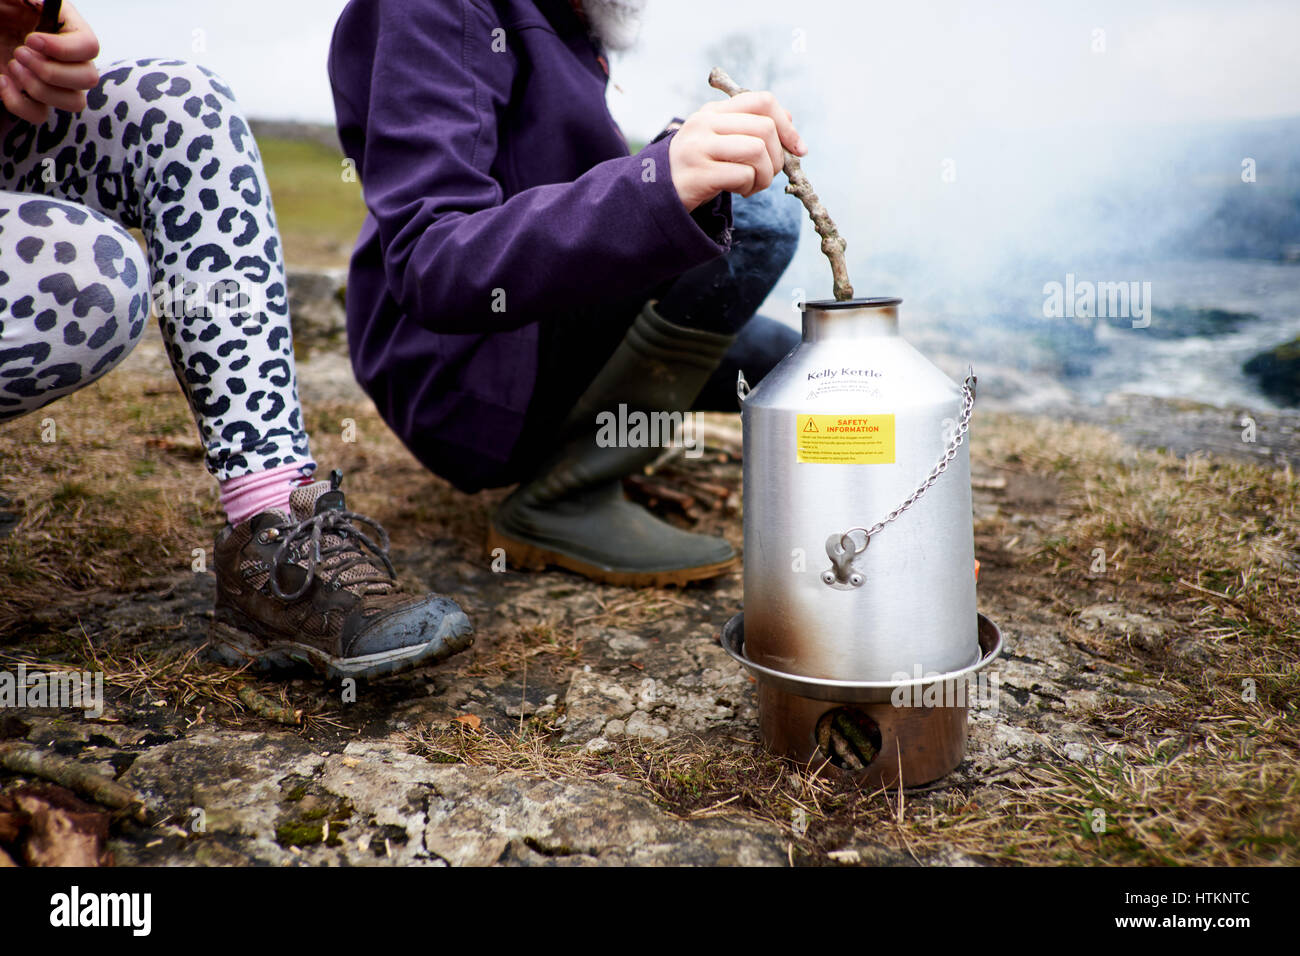 Two children outdoors around a Kelly Kettle wood burning stove kettle feeding in wood Stock Photo